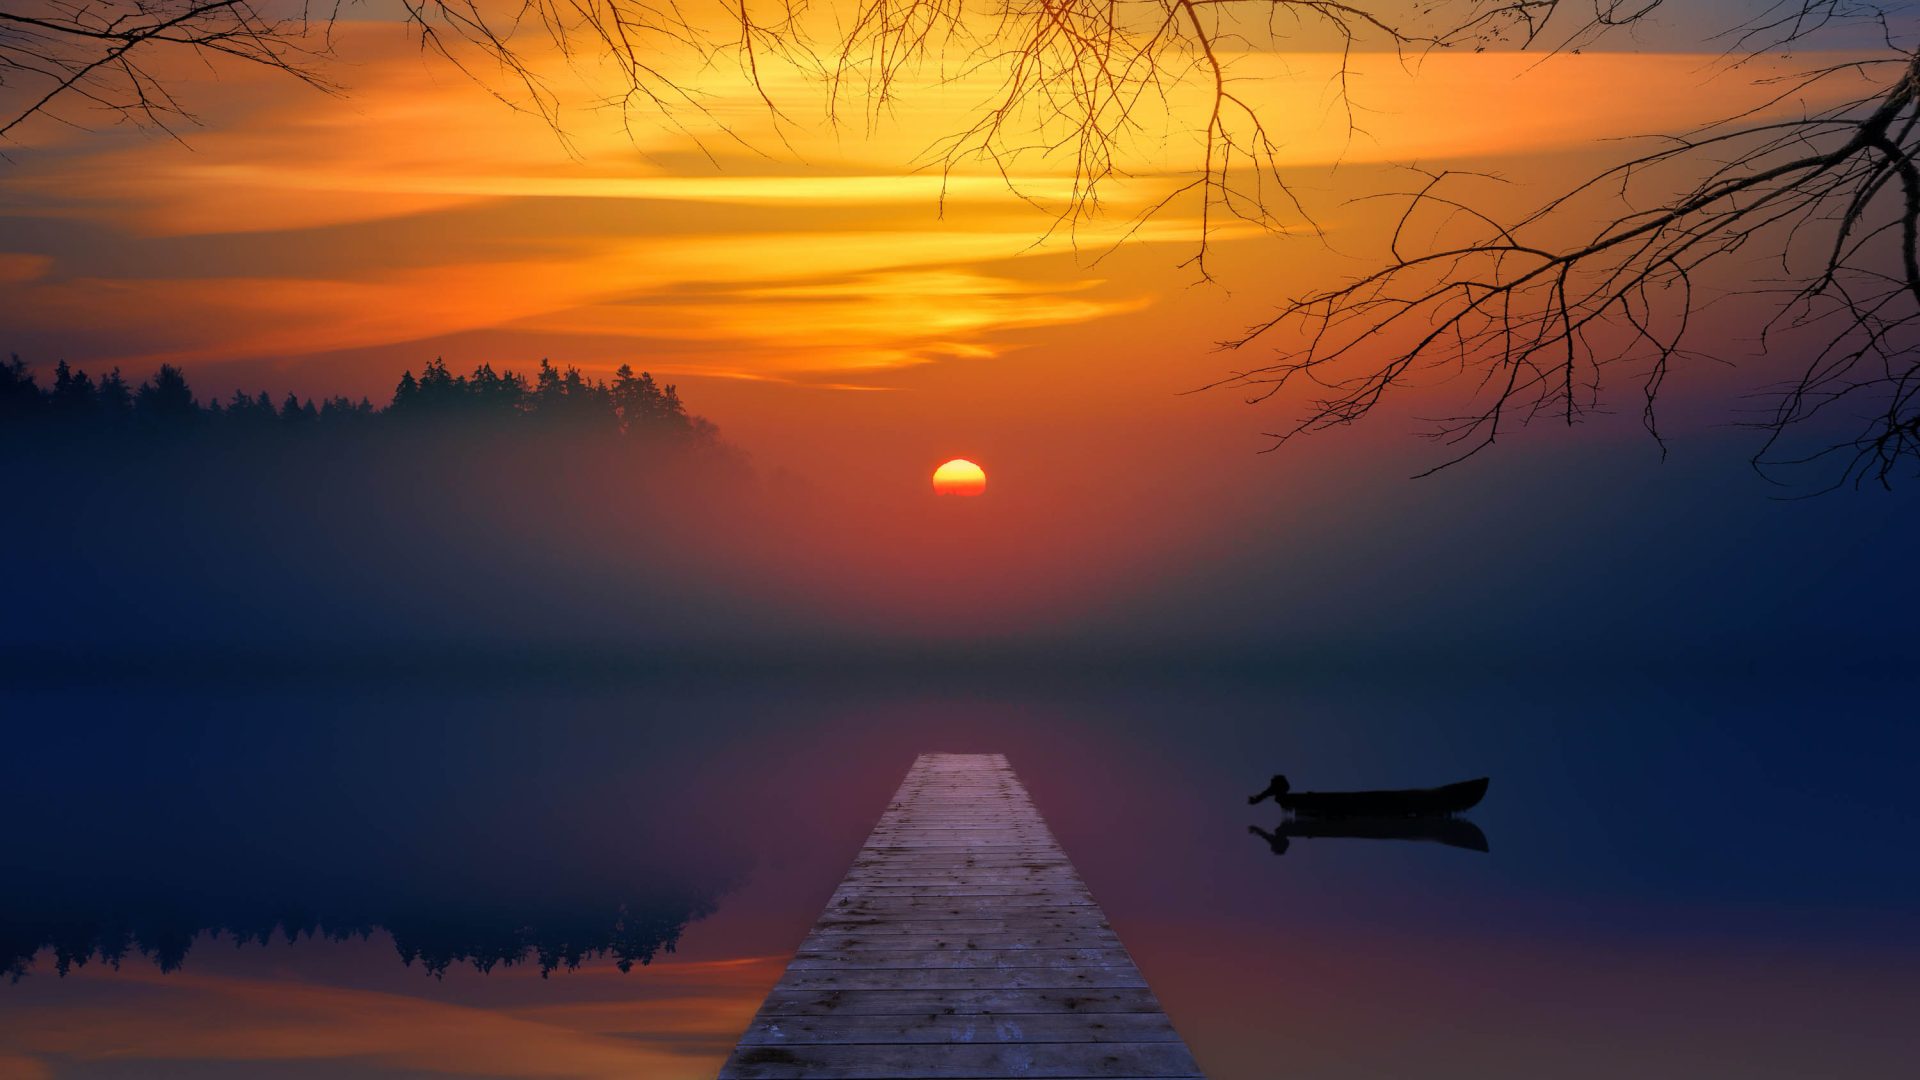 A sun sets over a lake. A jetty leads to the water.